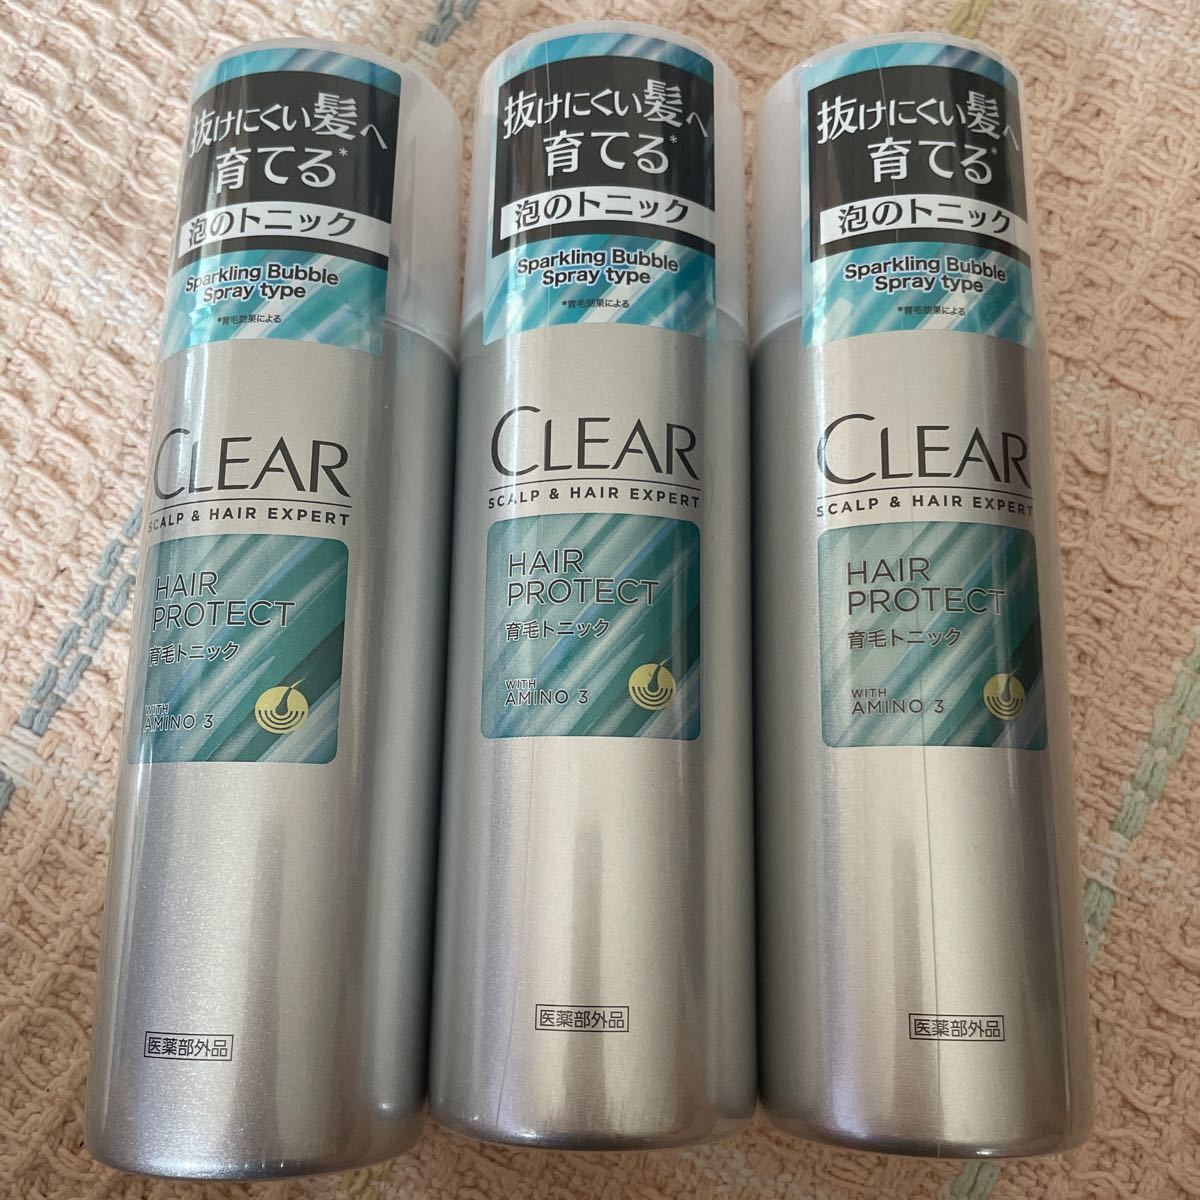 clear 育毛トニック　3本セット